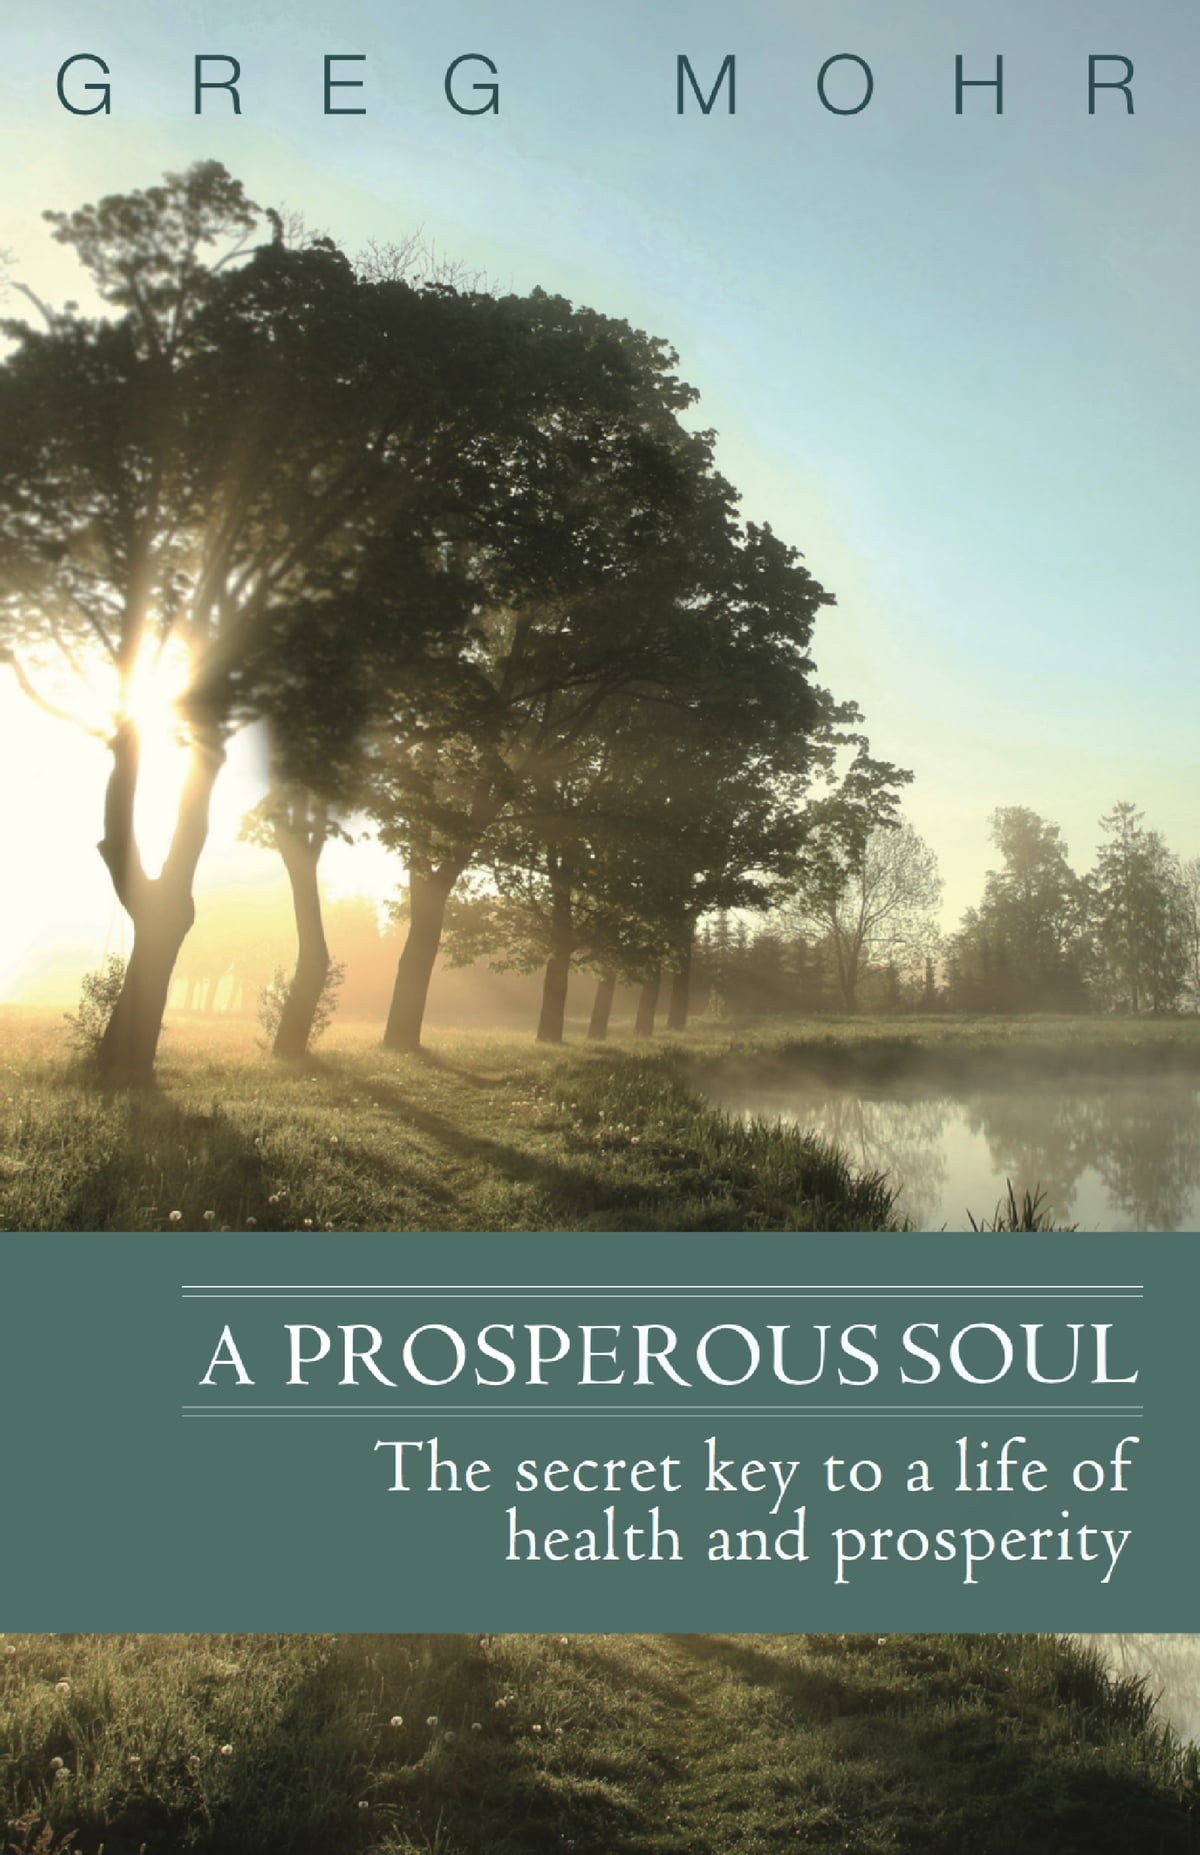 A Prosperous Soul: The Secret Key to a Life of Health and Prosperity